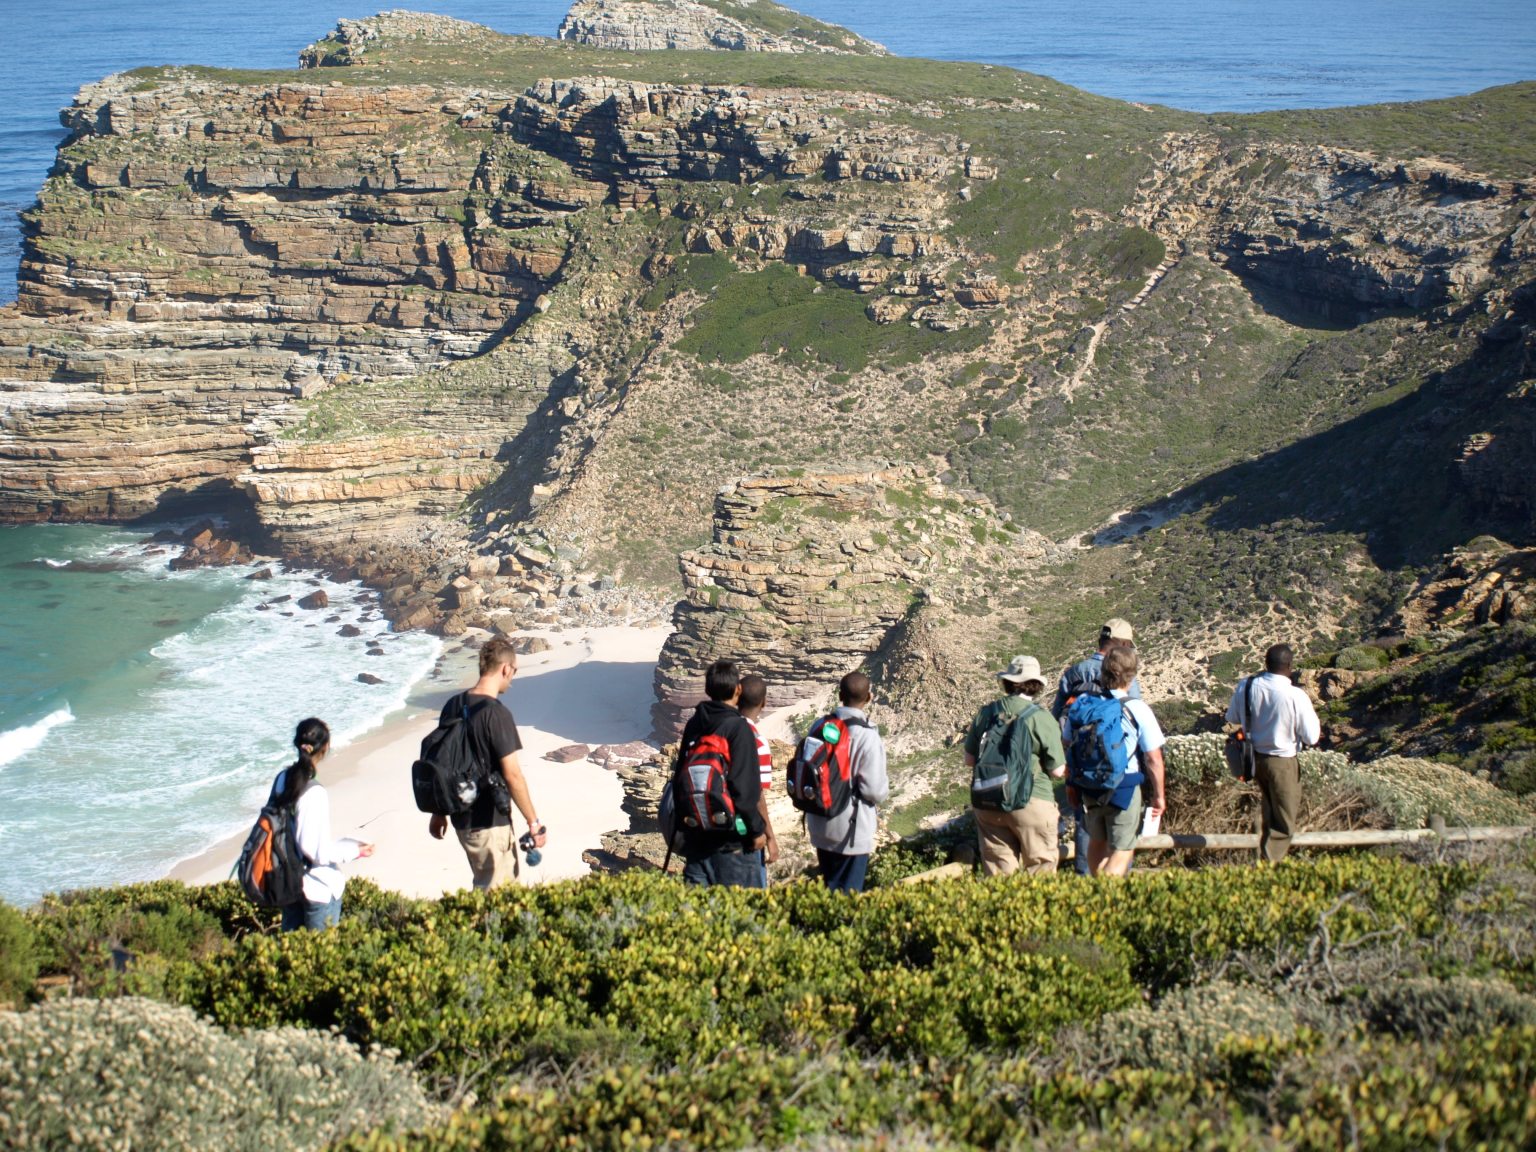 A group of students backpacks along a coastline in South Africa. The coast has steep, rocky cliffs partly covered with green grass and plants, extending down into clear turquoise water. Two of the cliffs encircle a small white beach. The students are of various genders and walk along a ridge in the foreground.